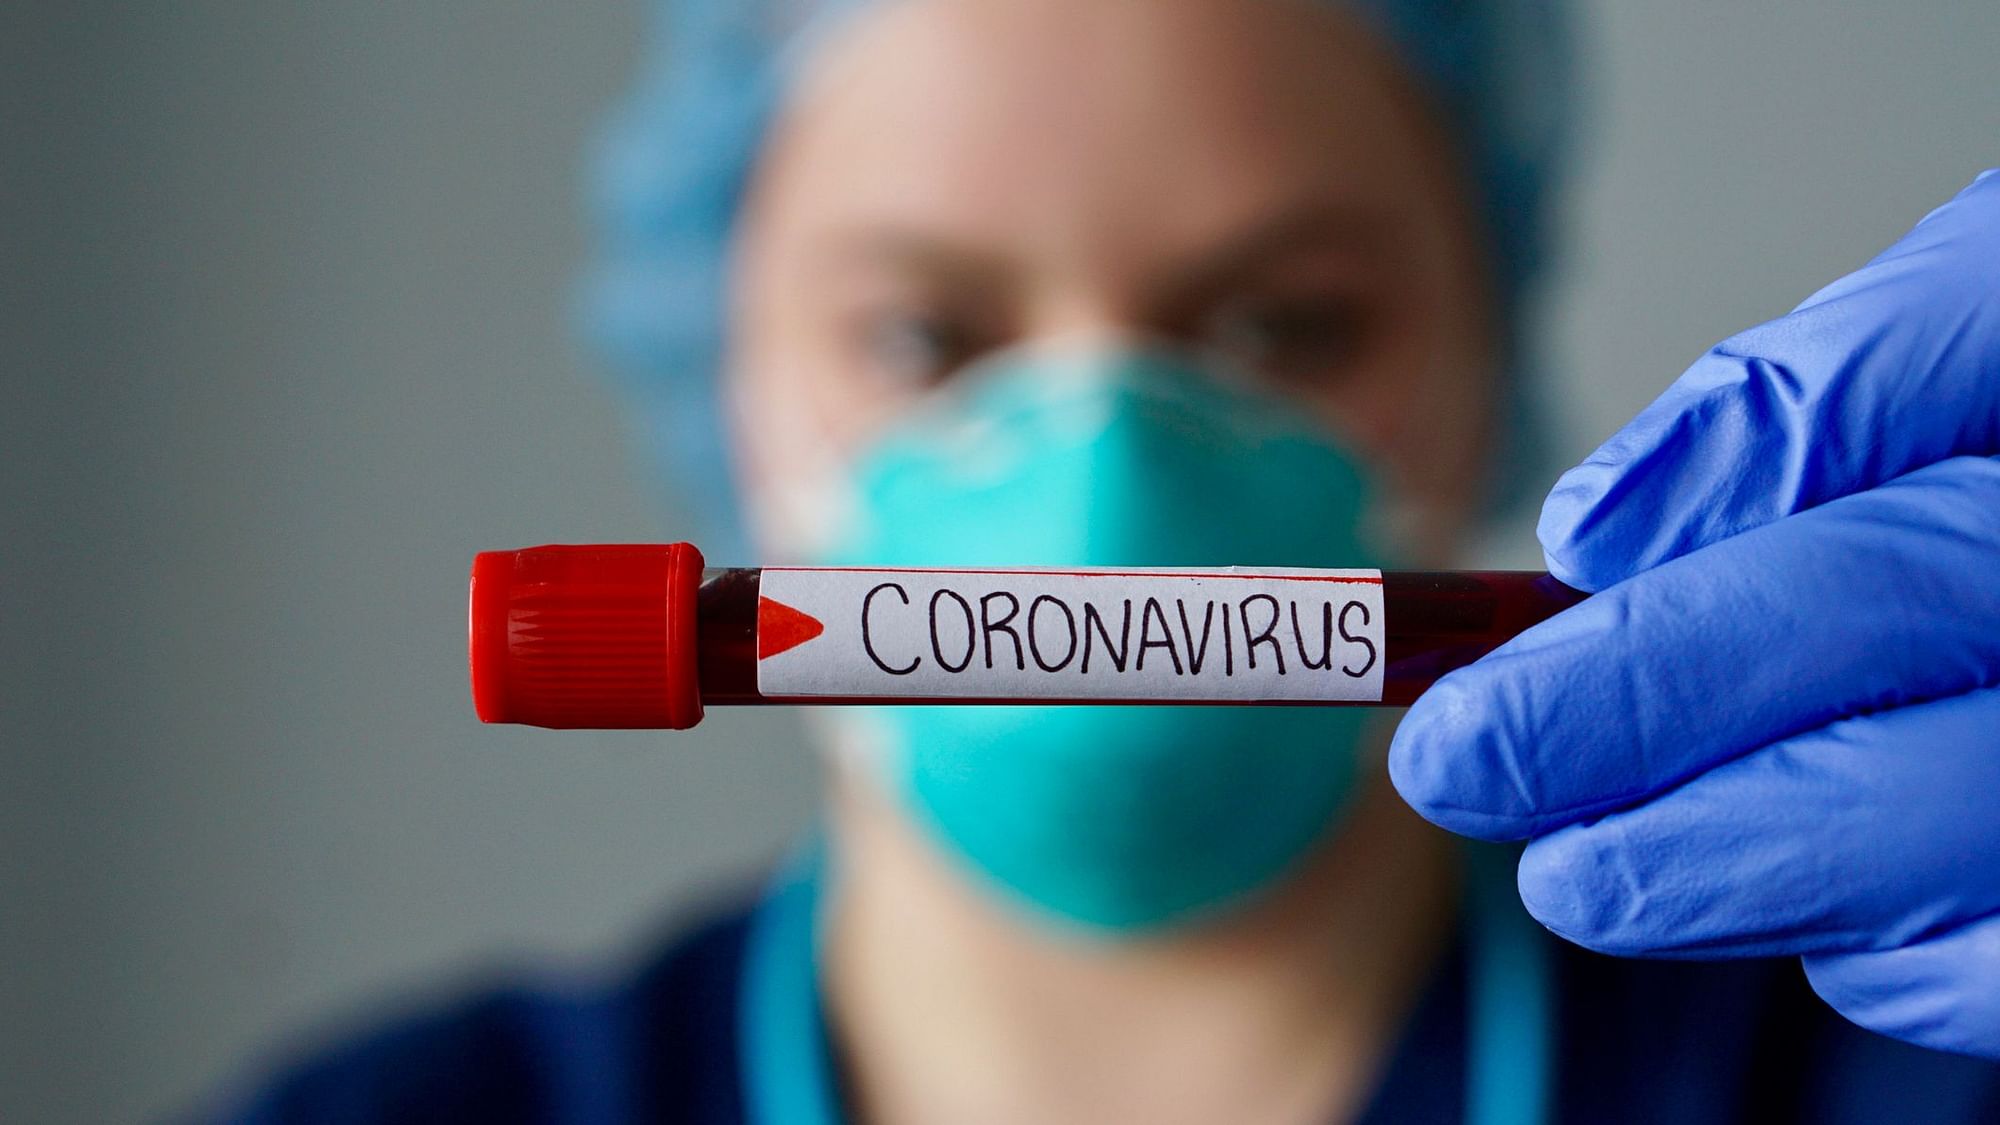 Since the beginning of the coronavirus pandemic, conspiracy theories have spread like the virus itself.